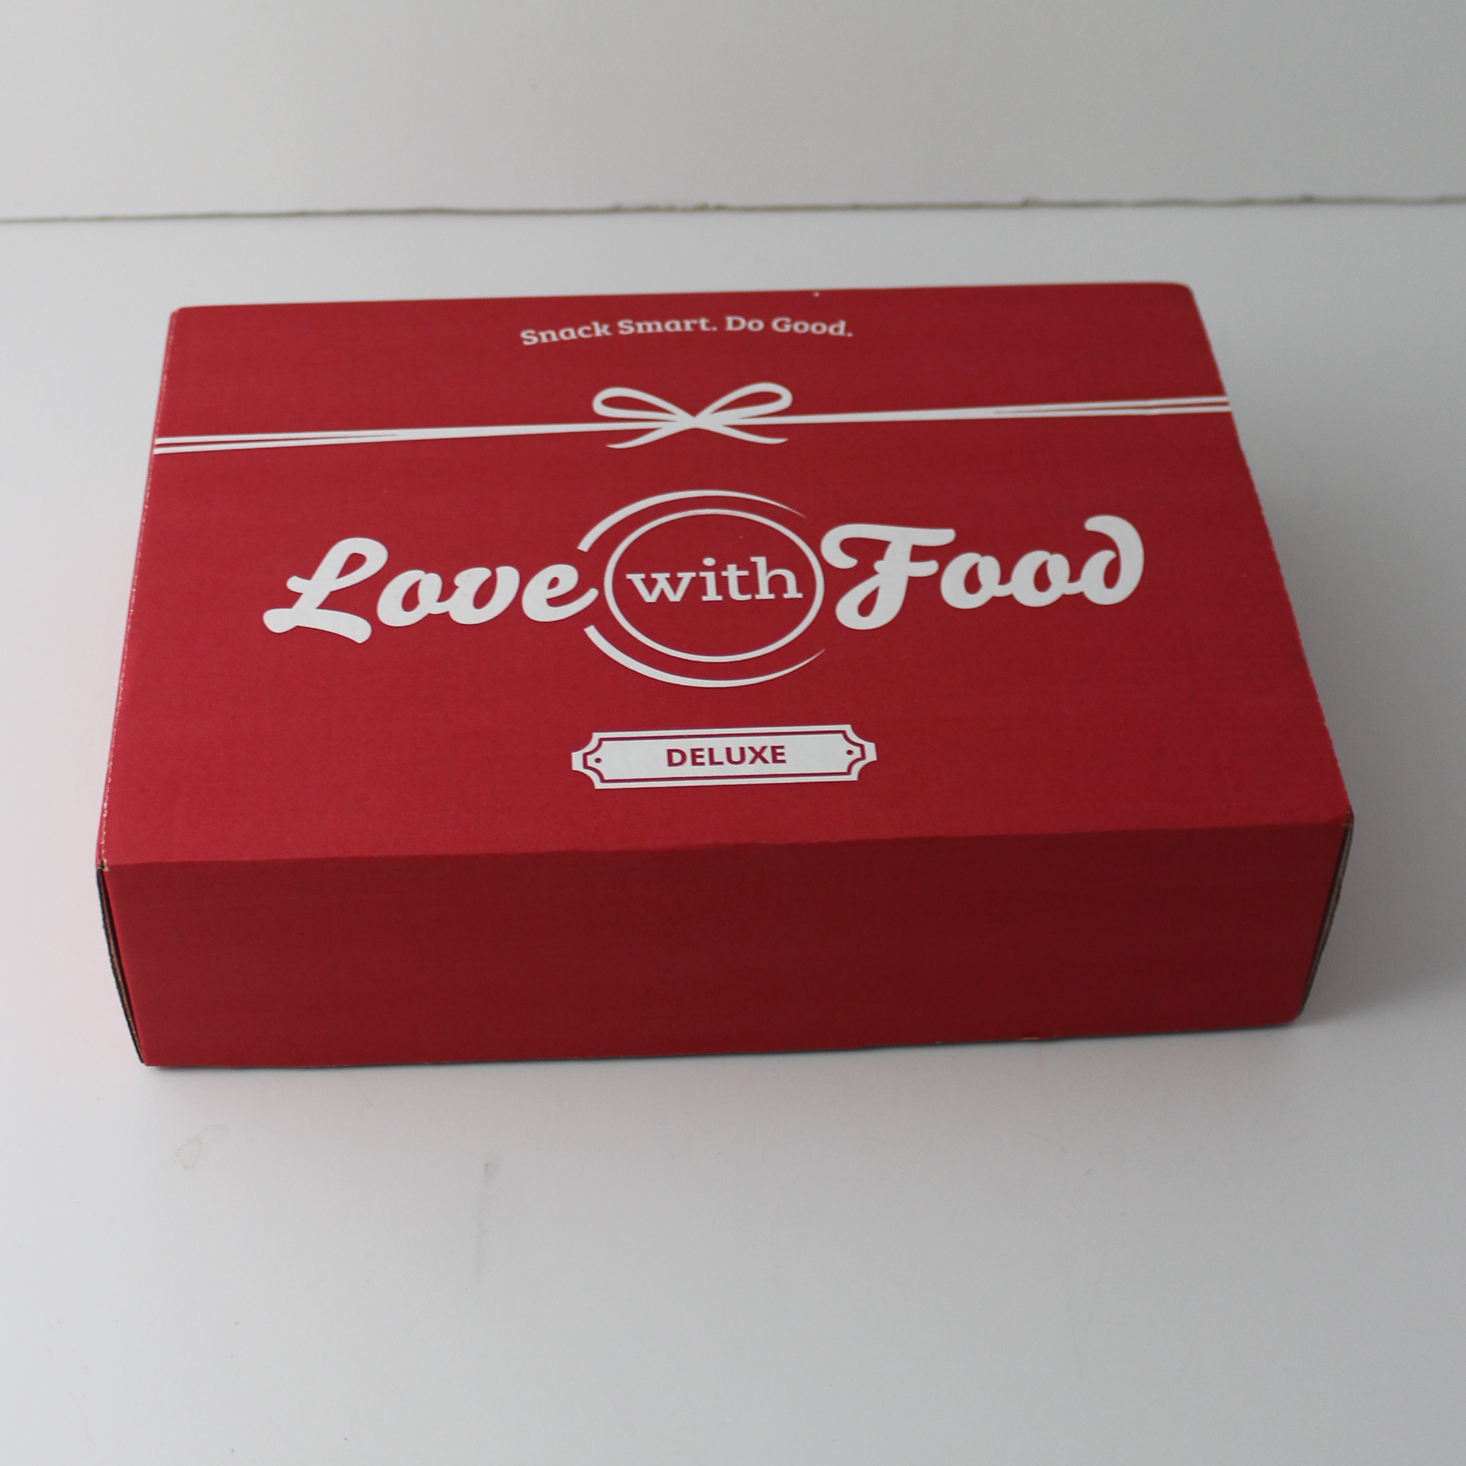 Love with Food Deluxe Box Review + Coupon – July 2018